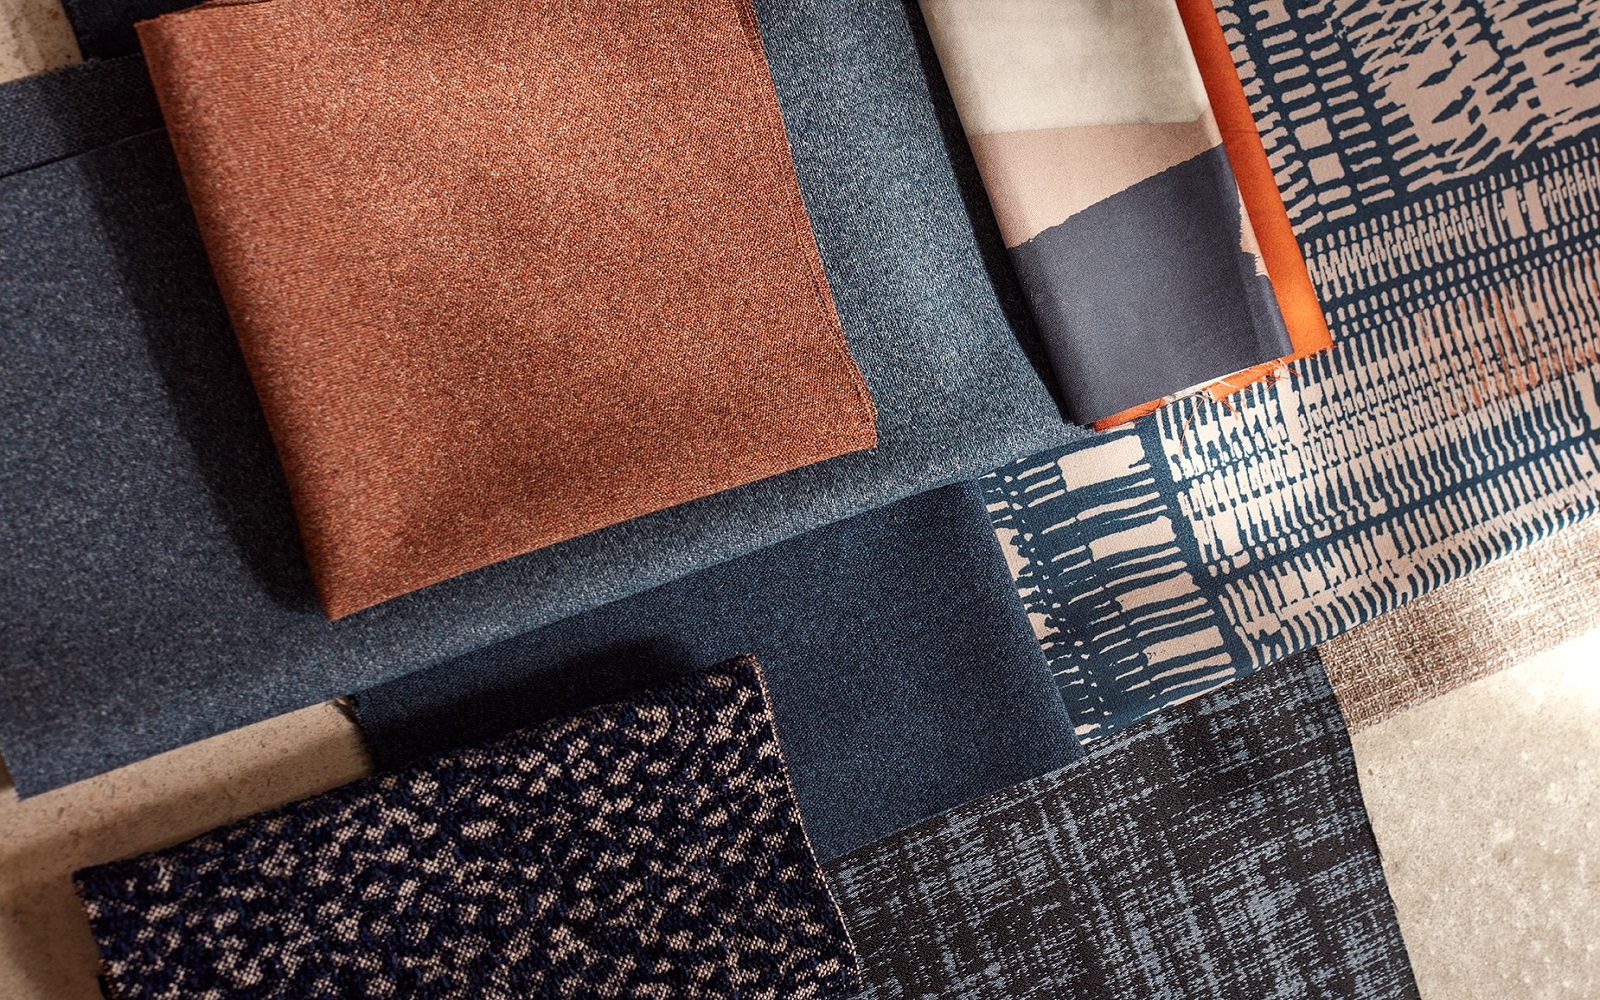 Zimmer + Rohde City Vibes fabric collection moodboard from HIX 2022